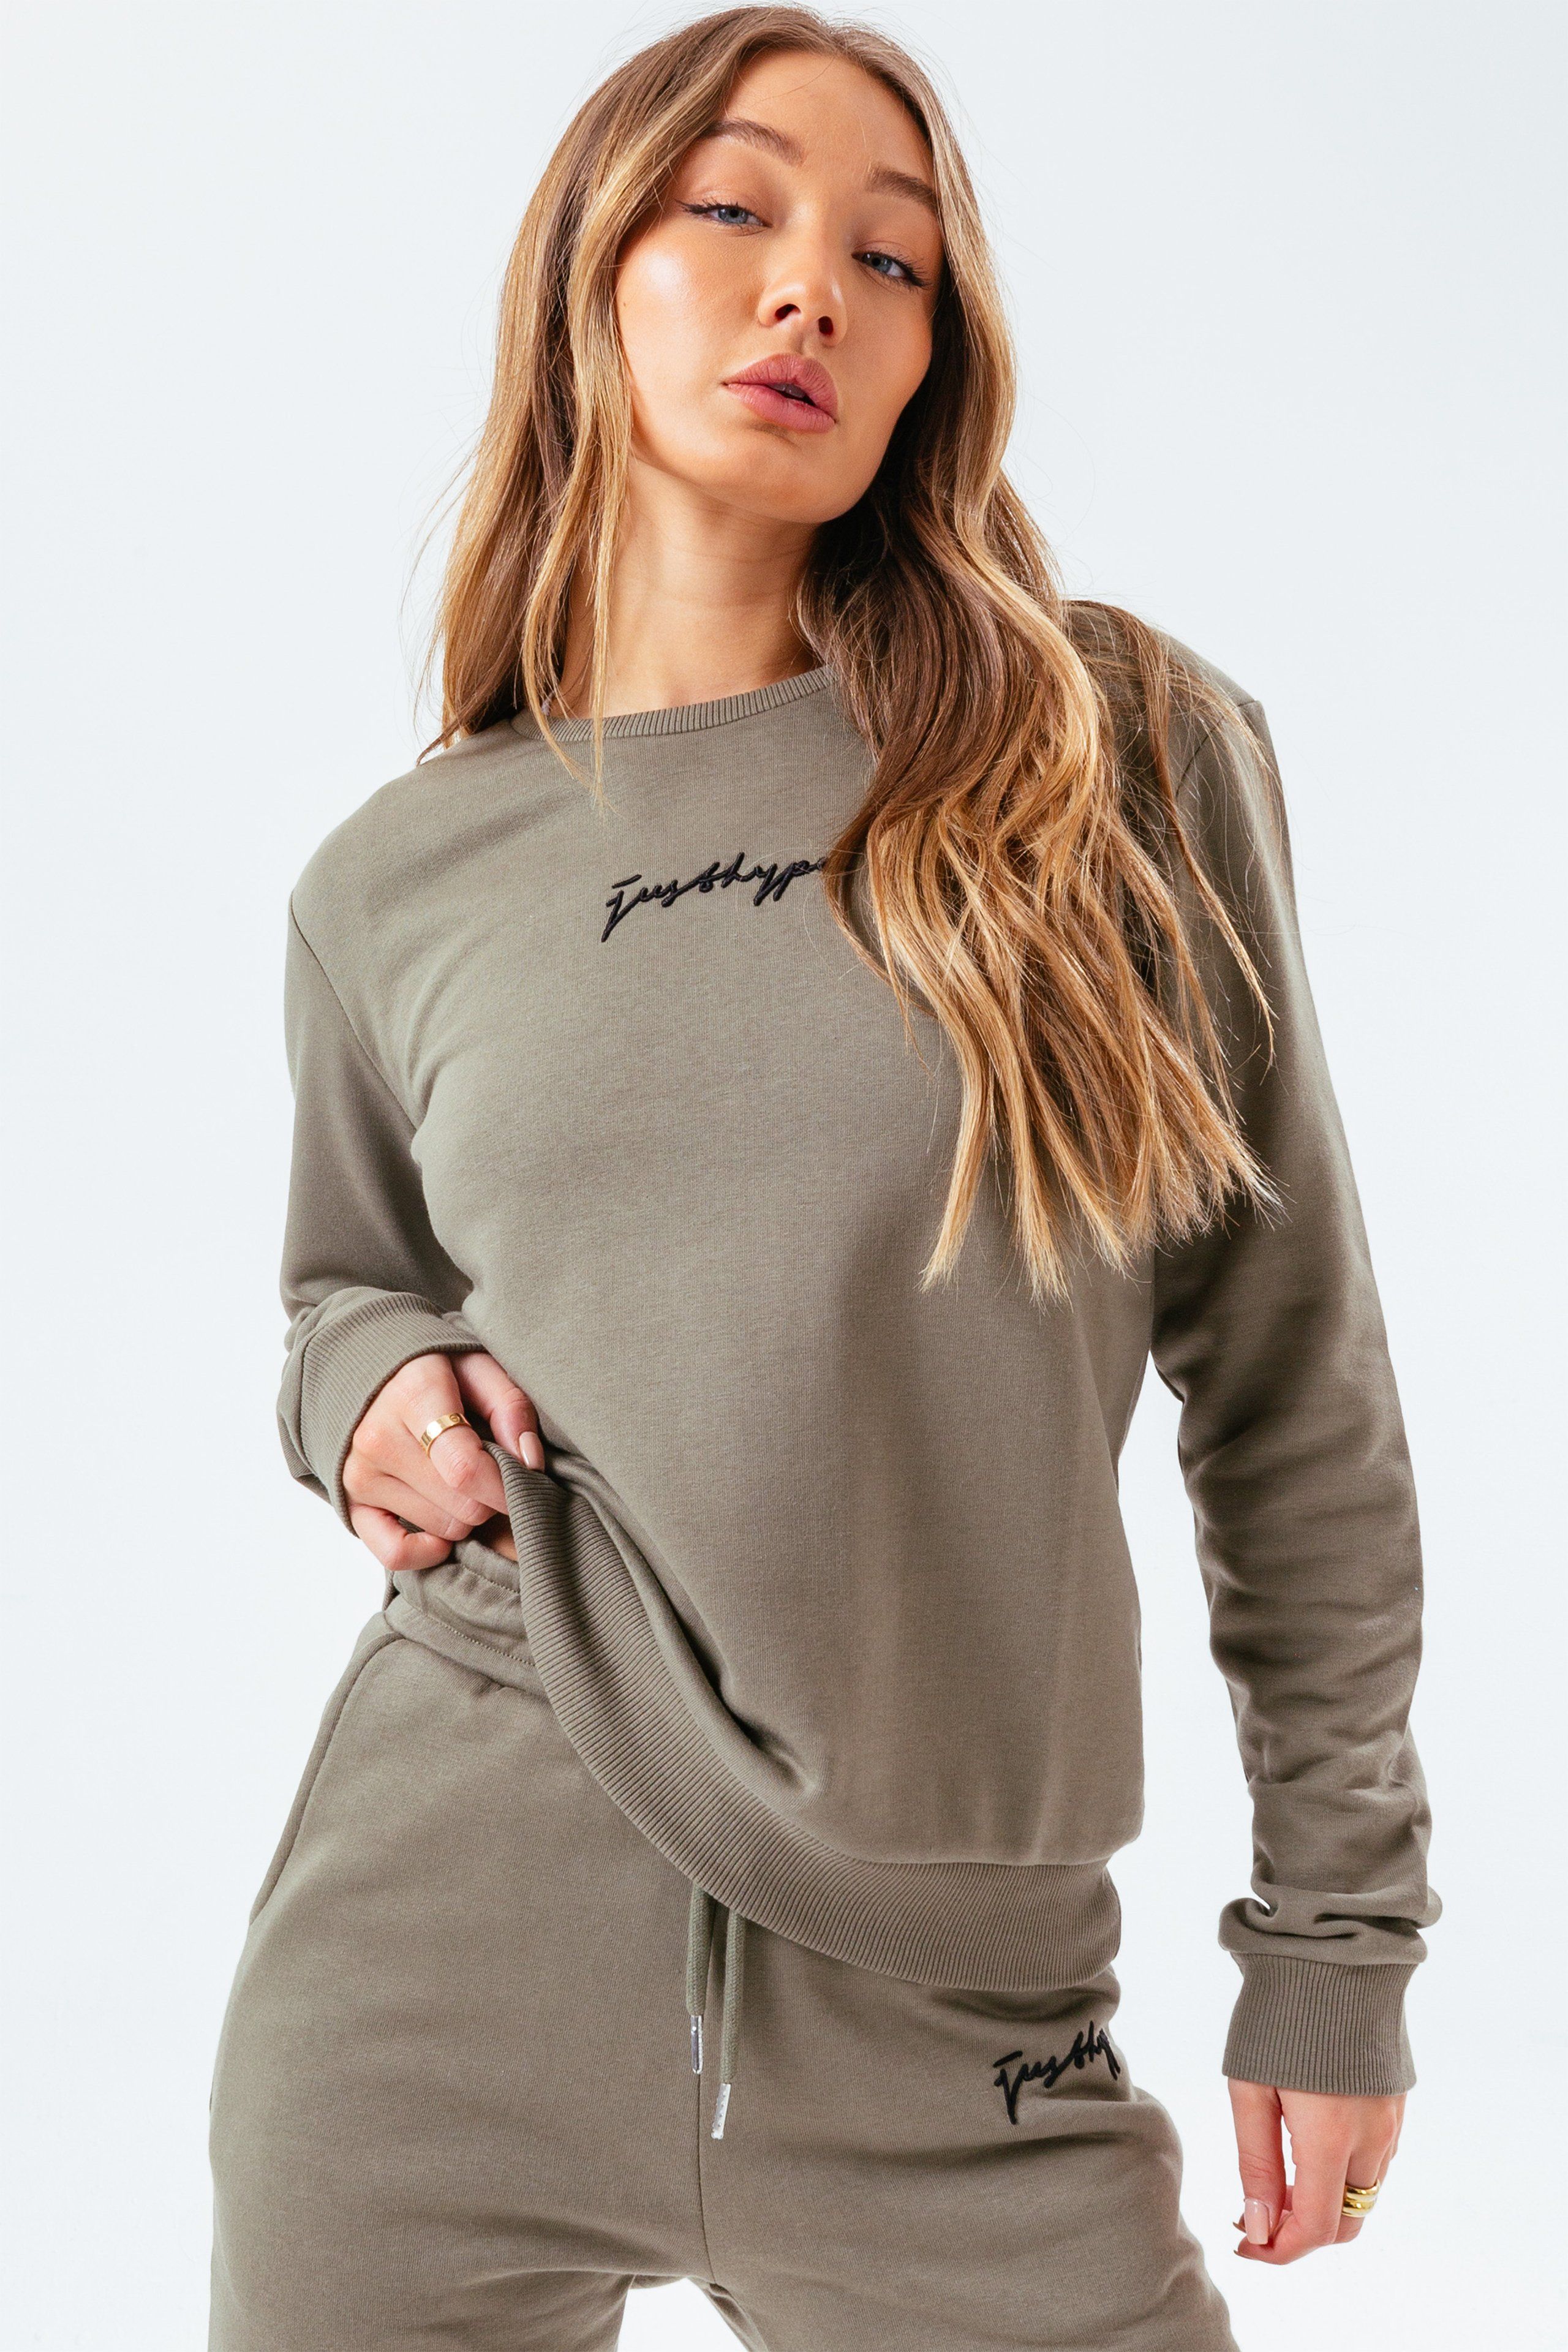 The perfect jumper to add to your everyday rotation. The HYPE. Women's Moss Signature Crewneck is perfectly versatile for every occasion, whether your dressing up or dressing down. Designed in a moss green 80% cotton and 20% polyester fabric base, finished with a contrasting white just hype scribble logo for supreme amount of comfort and style. With a crew neckline and long sleeves for a classic fit. This essential jumper can be work tucked into a pair of high-waisted denim wash jeans for a smart casual look, or with a pair of leggings for your morning workout. Machine wash at 30 degrees.